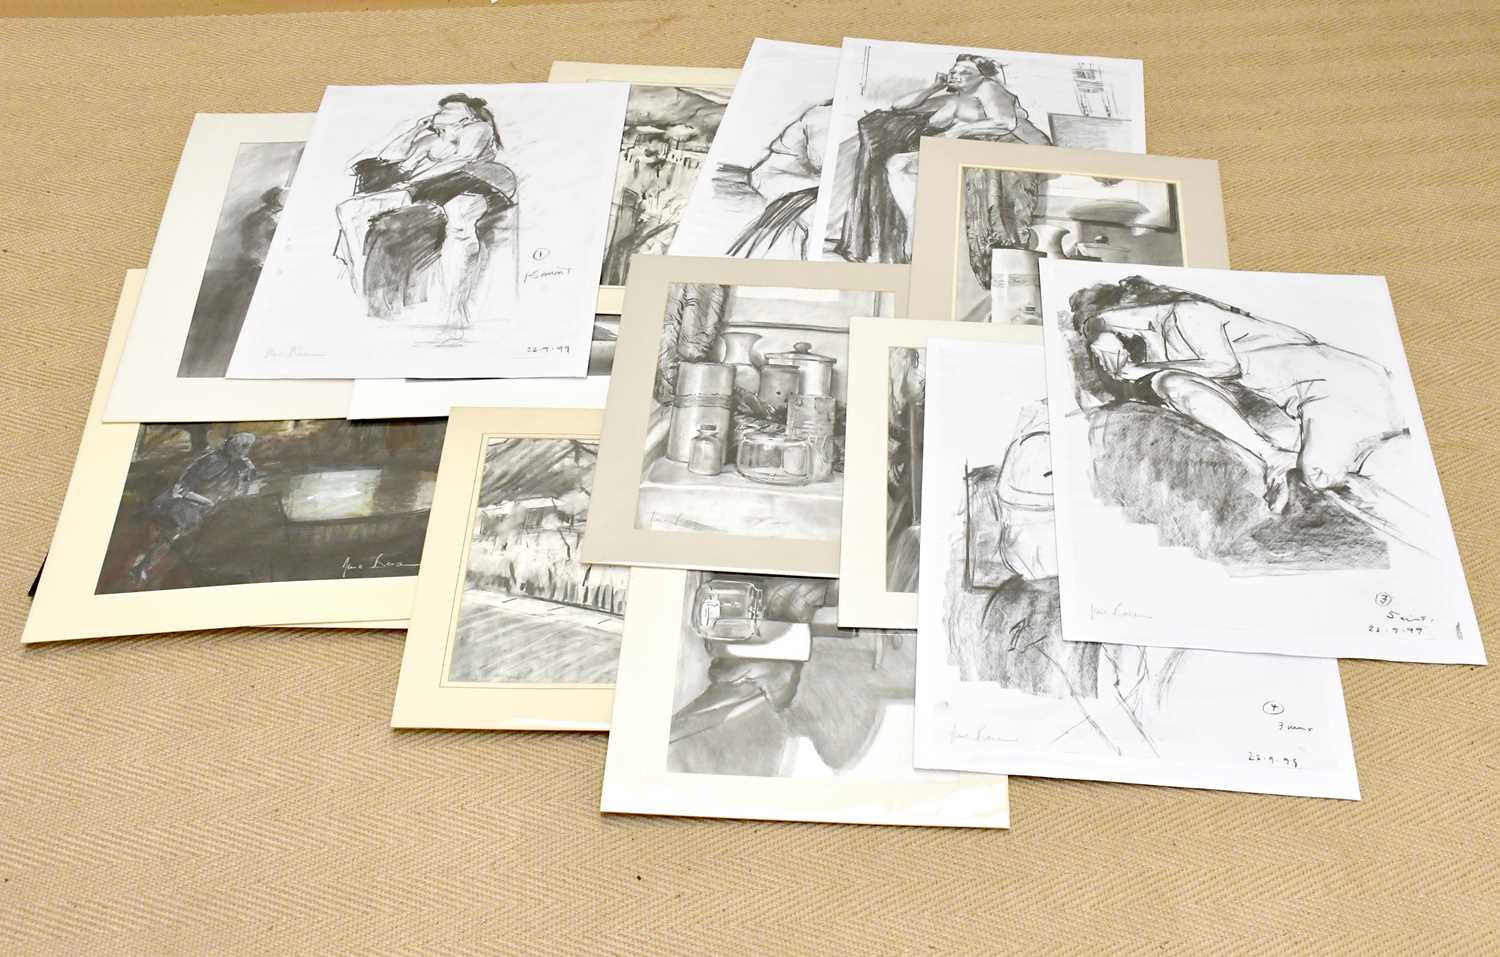 † JUNE BEVAN; a large collection of charcoal and pencil drawings, mainly of still life studies.